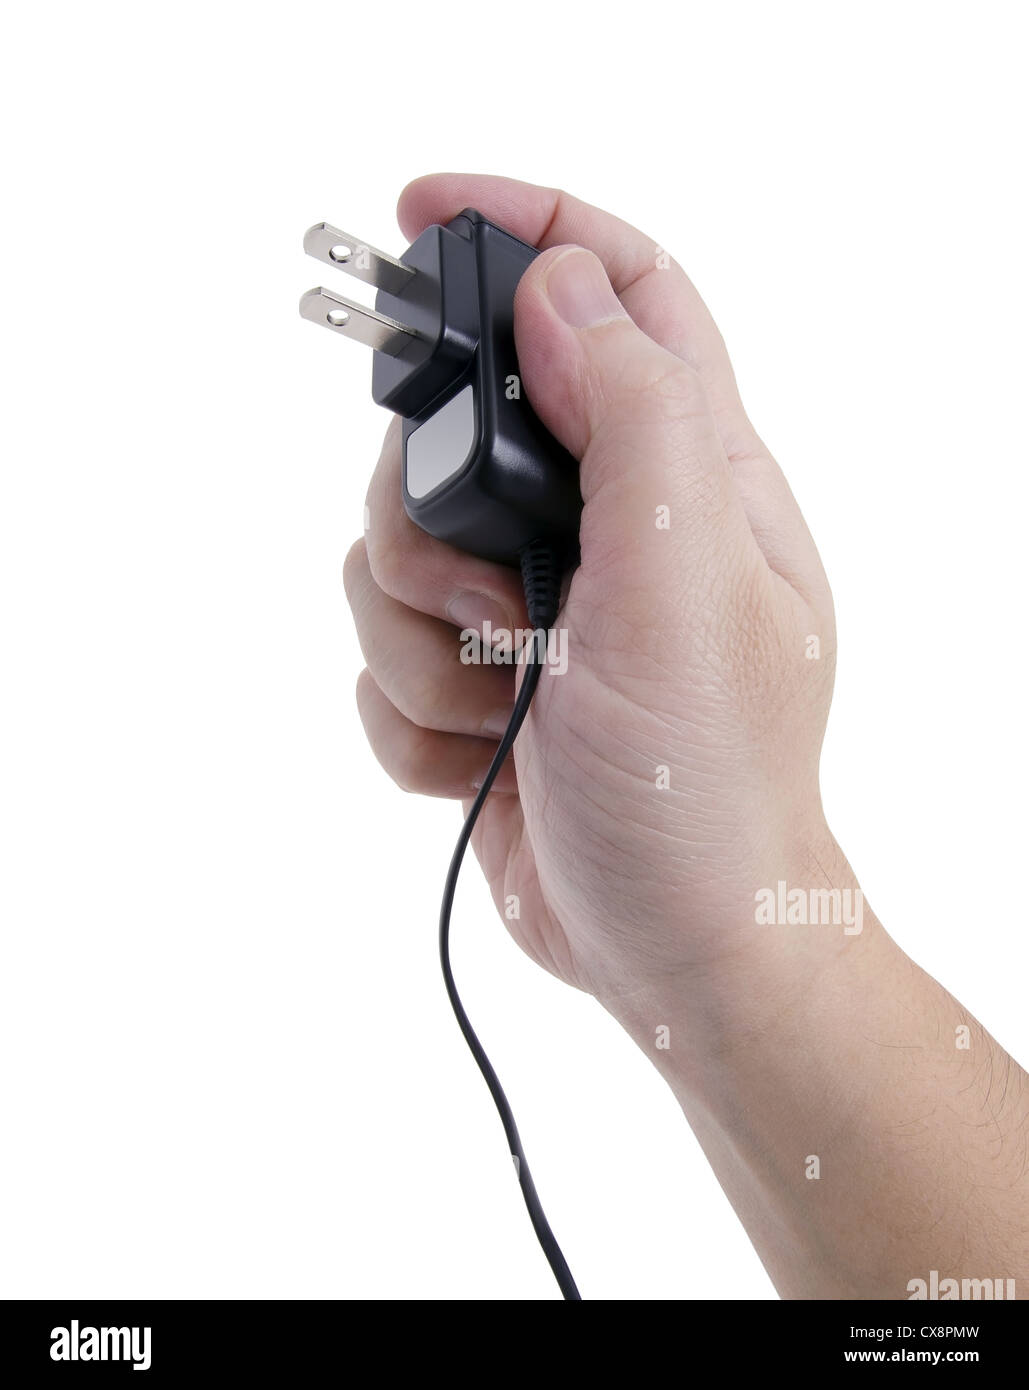 hand holding a power source ready to connect the outlet. Stock Photo